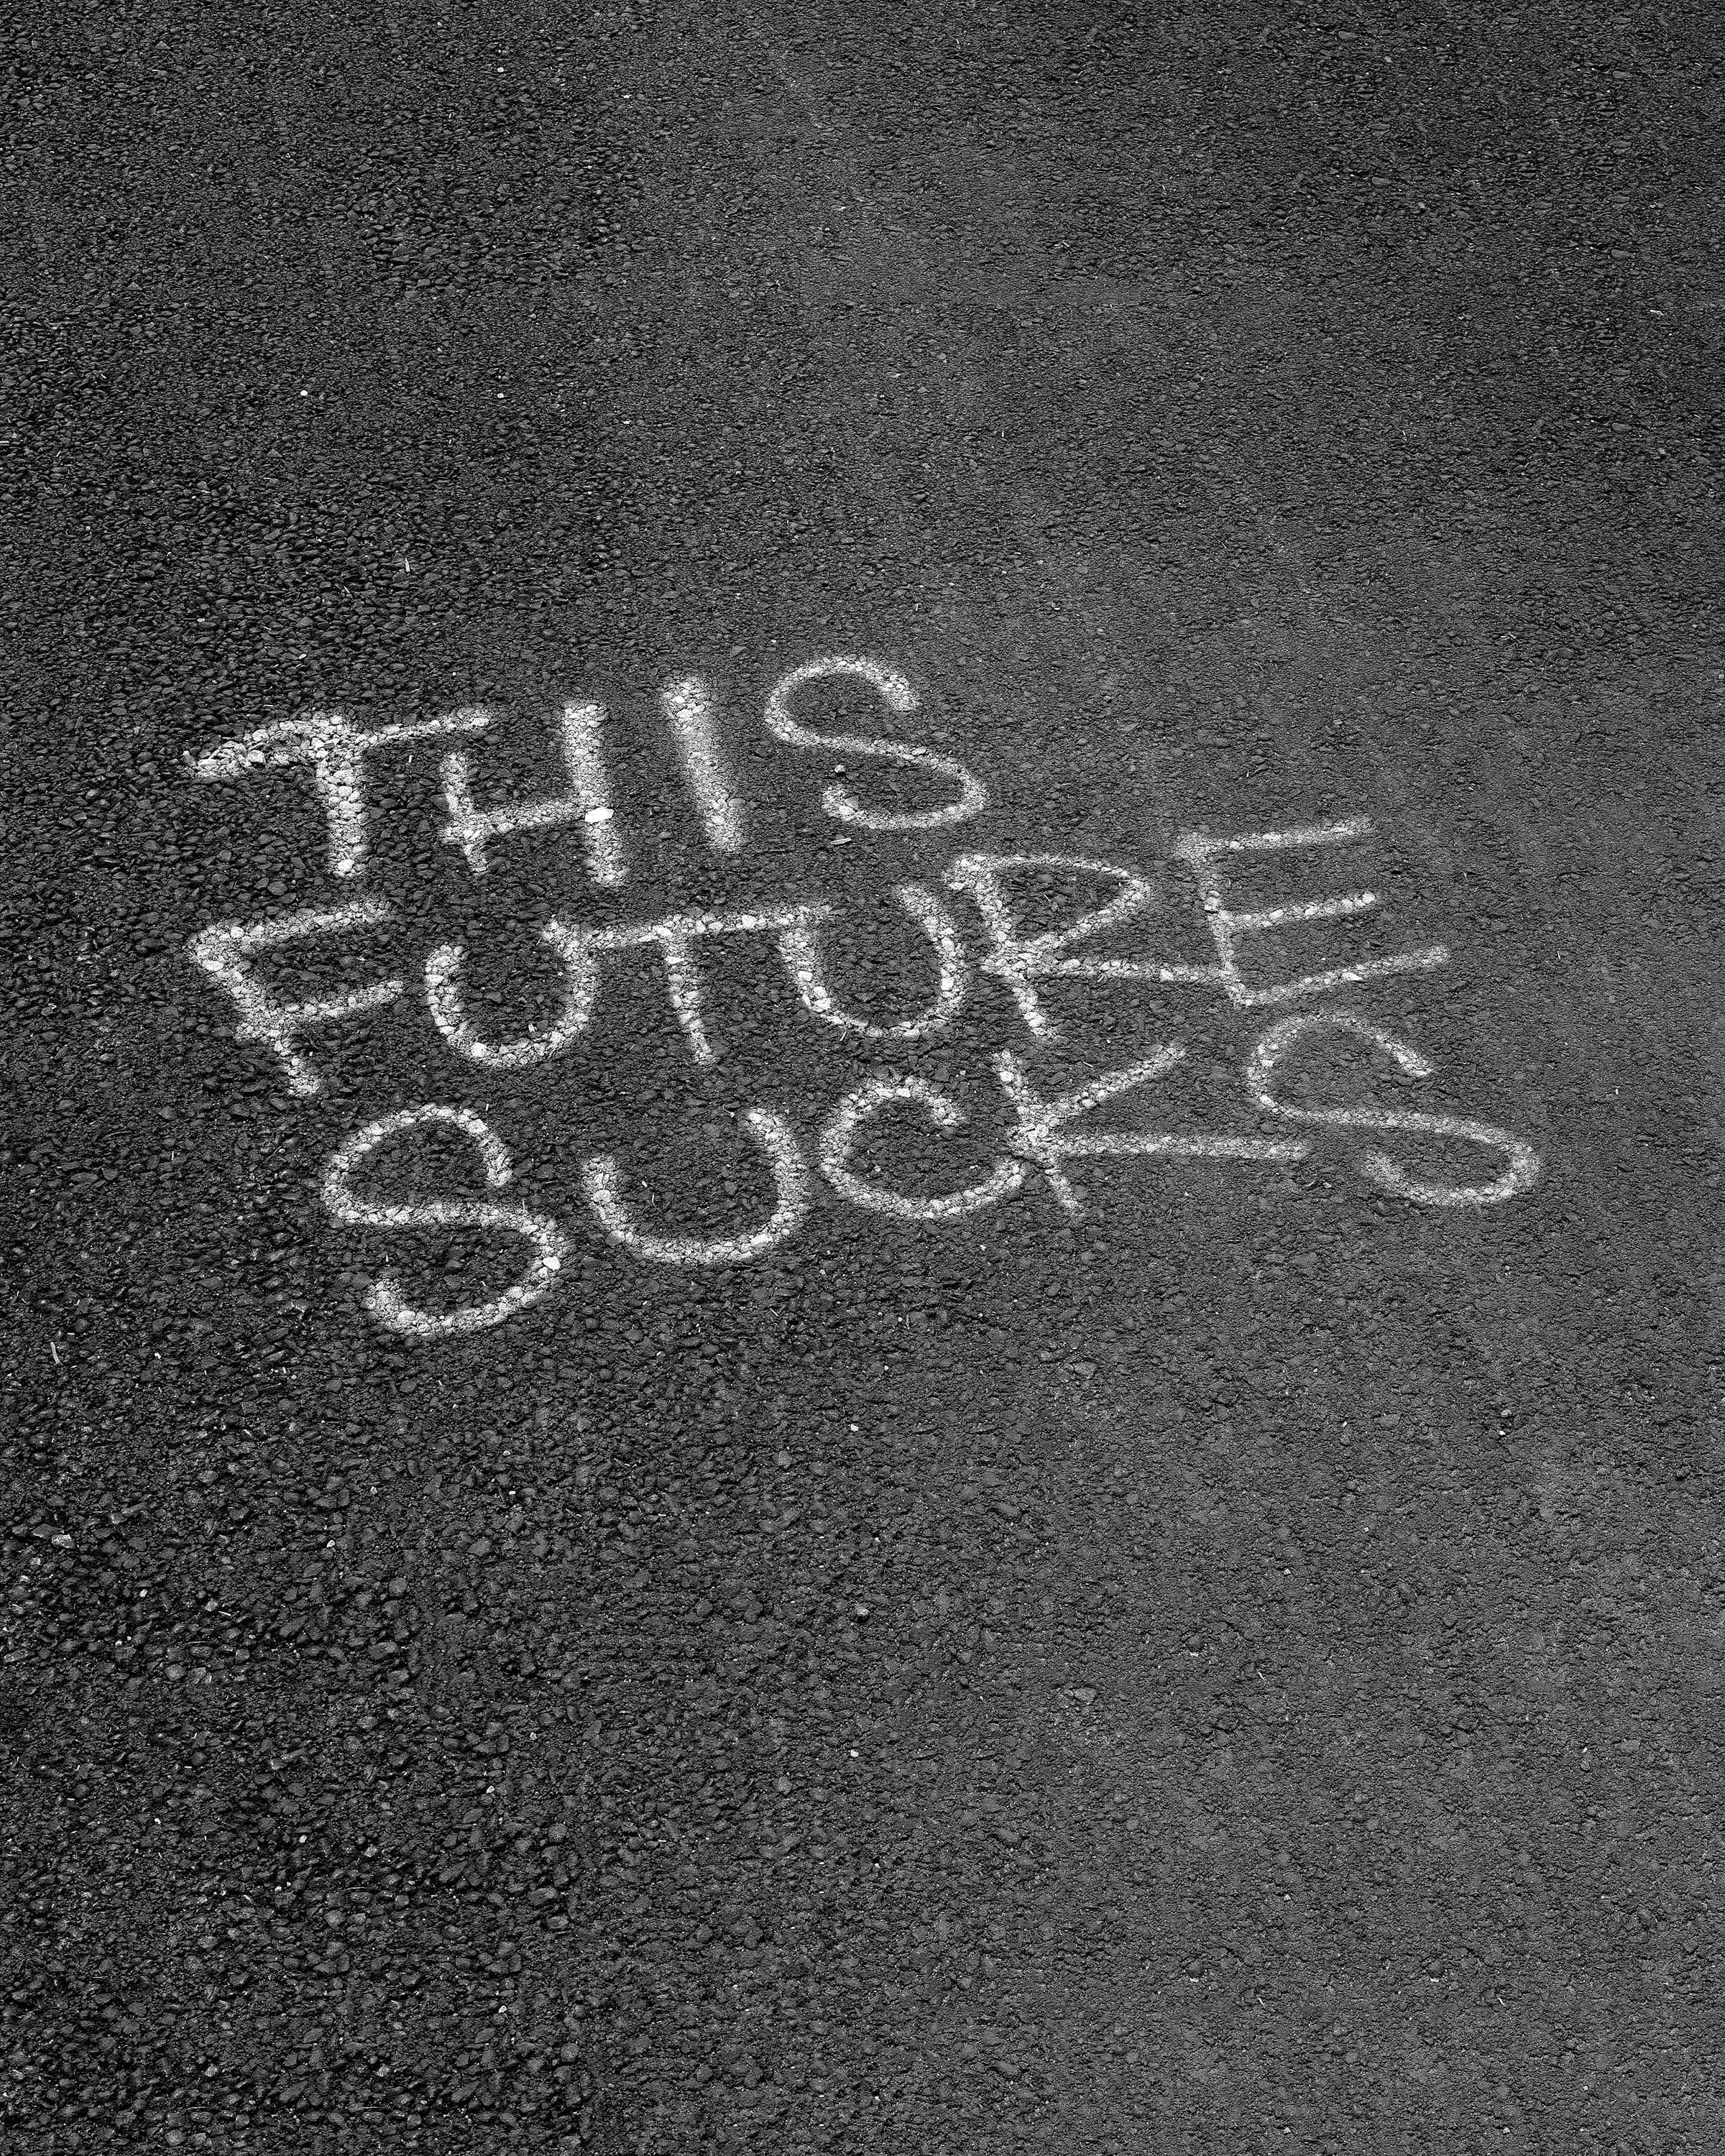 Graffiti with the text, This Future Sucks, written on asphalt surface of a bike path.